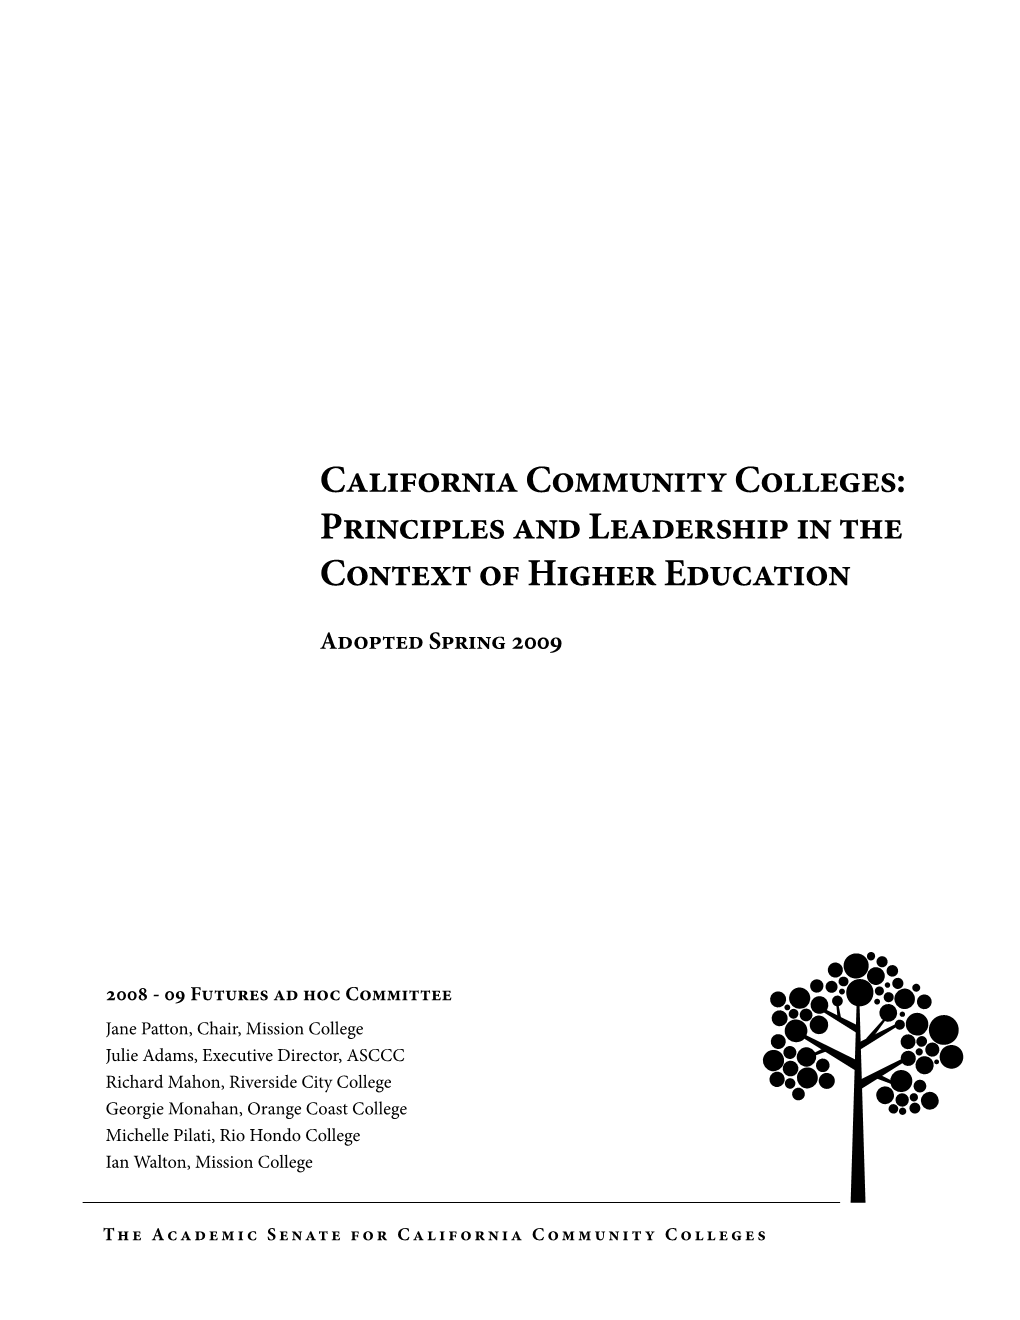 California Community Colleges: Principles and Leadership in the Context of Higher Education